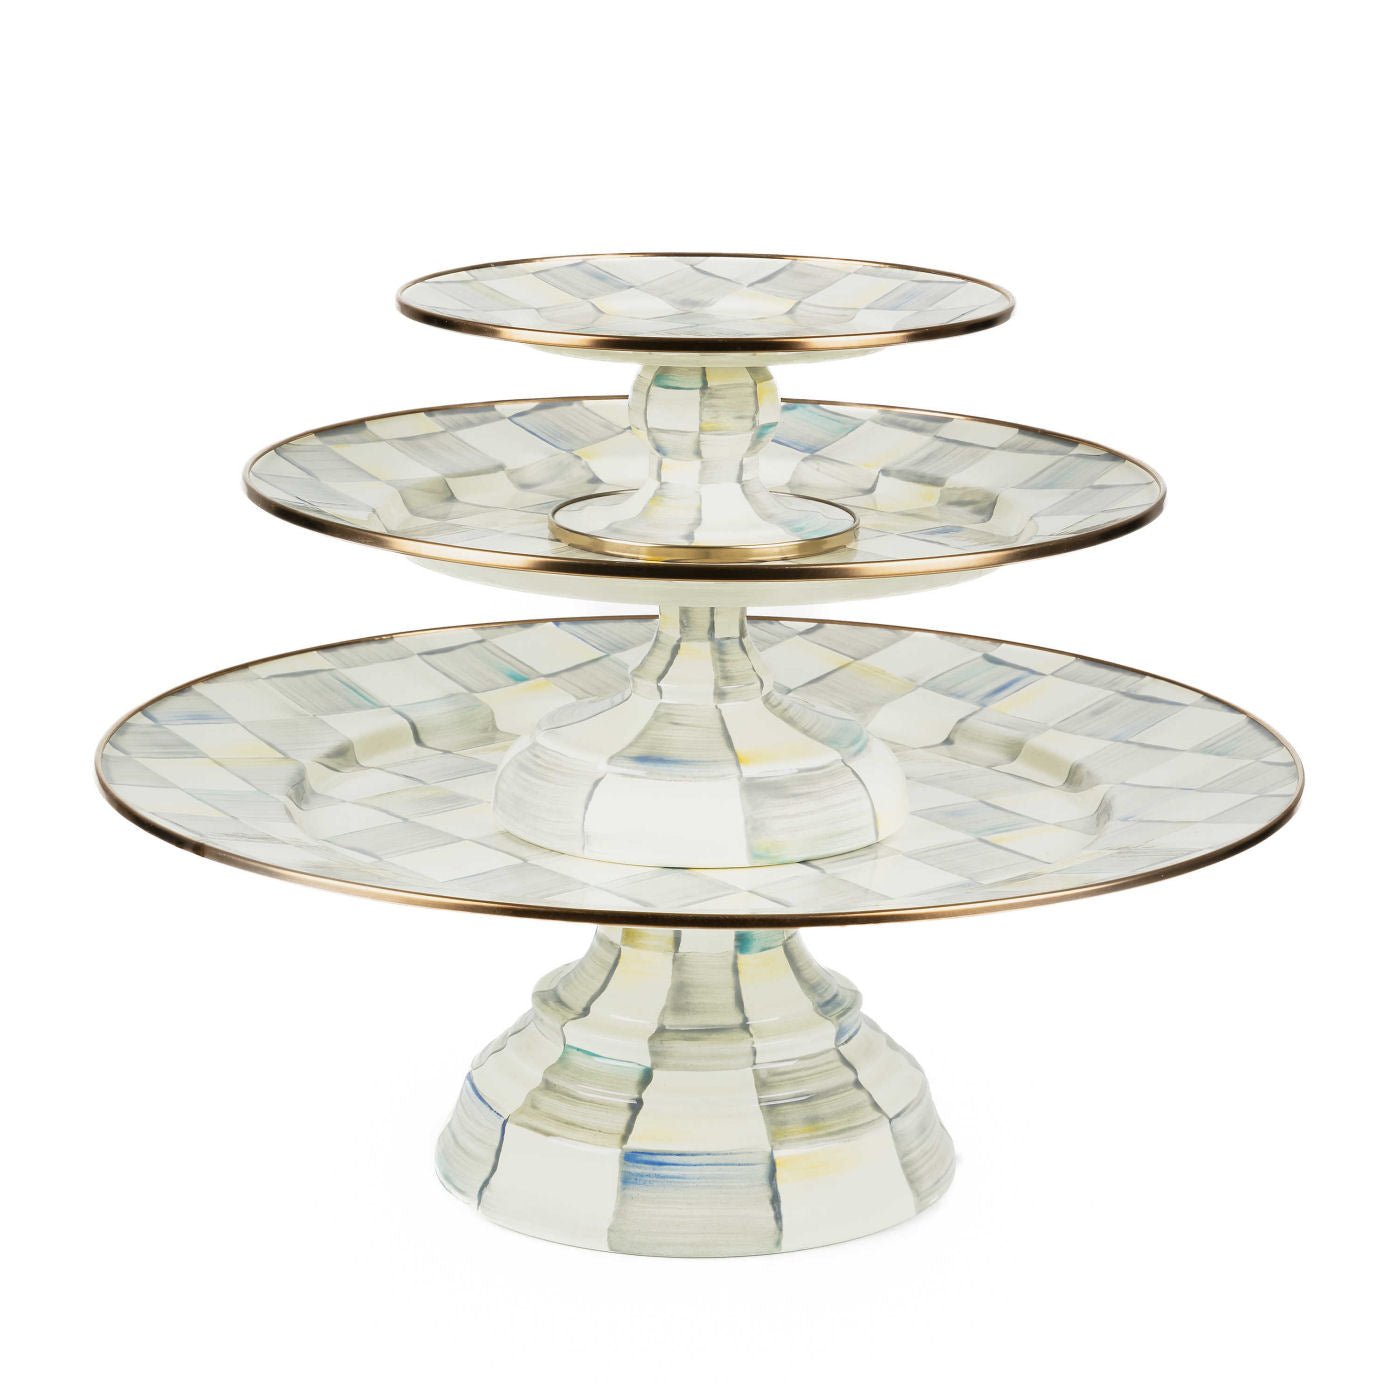 Luxury Dining Sterling Check Enamel Pedestal Platter - Small - |VESIMI Design| Luxury and Rustic bathrooms online